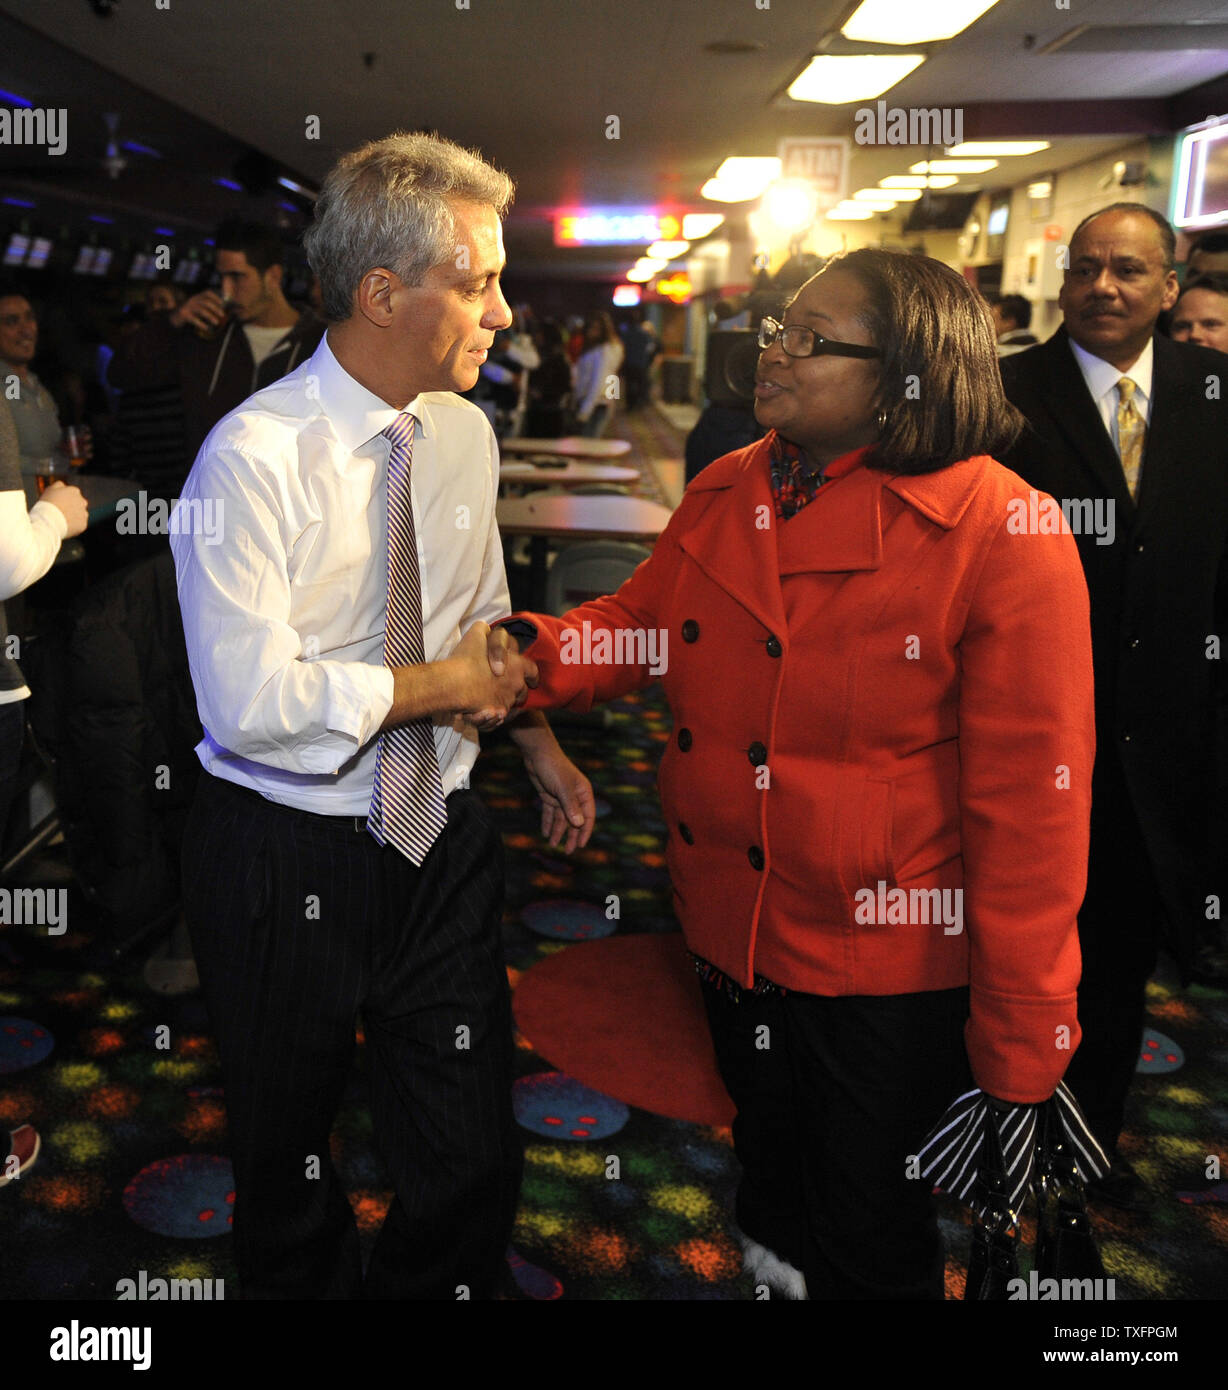 Chicago mayoral candidate Rahm Emanuel greets patrons at a bowling alley in Chicago on January 24, 2011. An Illinois appellate court threw the former congressman and White House chief of staff off the ballot ruling that he did not meet the residency requirements to run for mayor of Chicago.      UPI/Brian Kersey Stock Photo